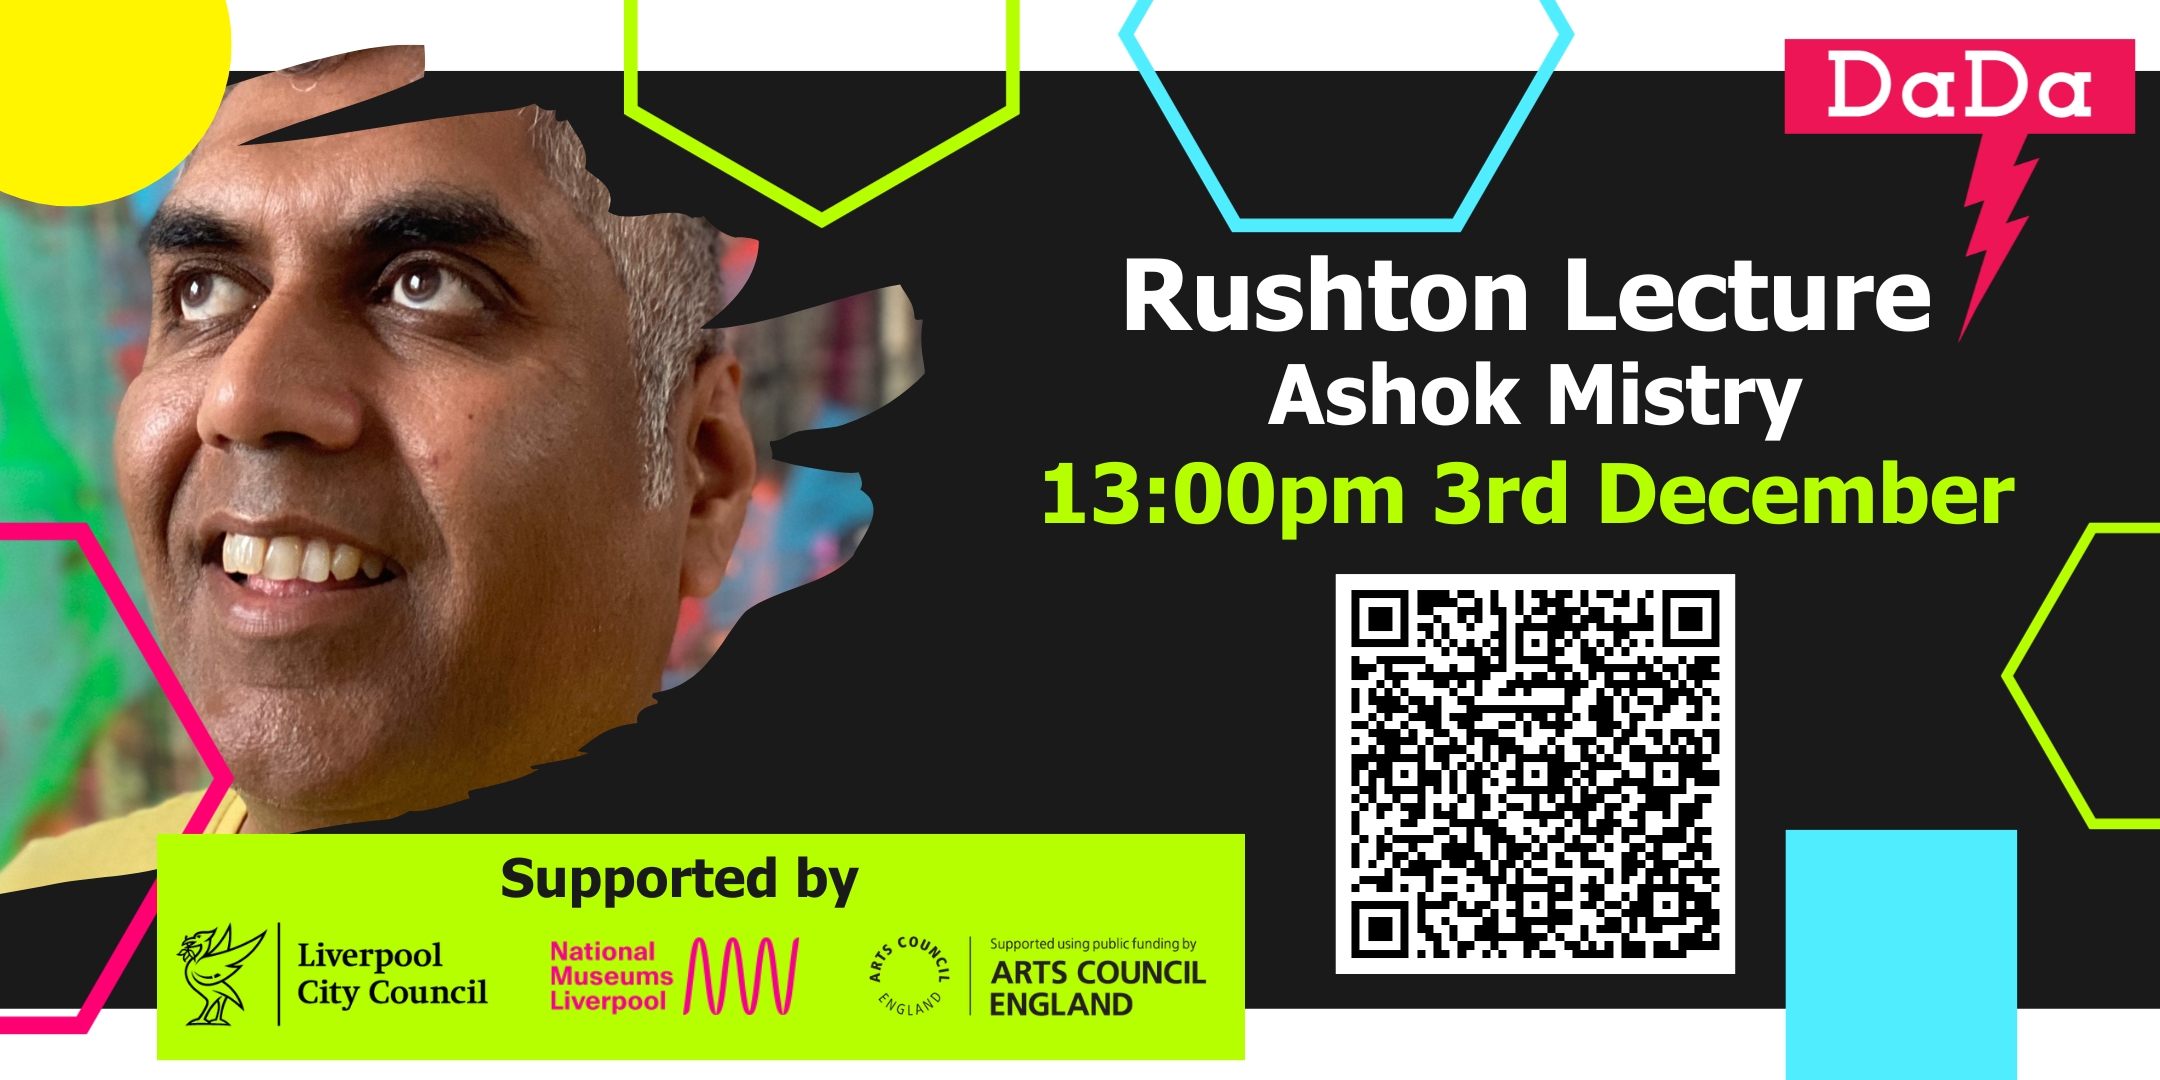 DaDa announcement post for the annual Rushton Lecture, featuring an image of Ashok Mistry, the speaker at the lecture. with funder logos